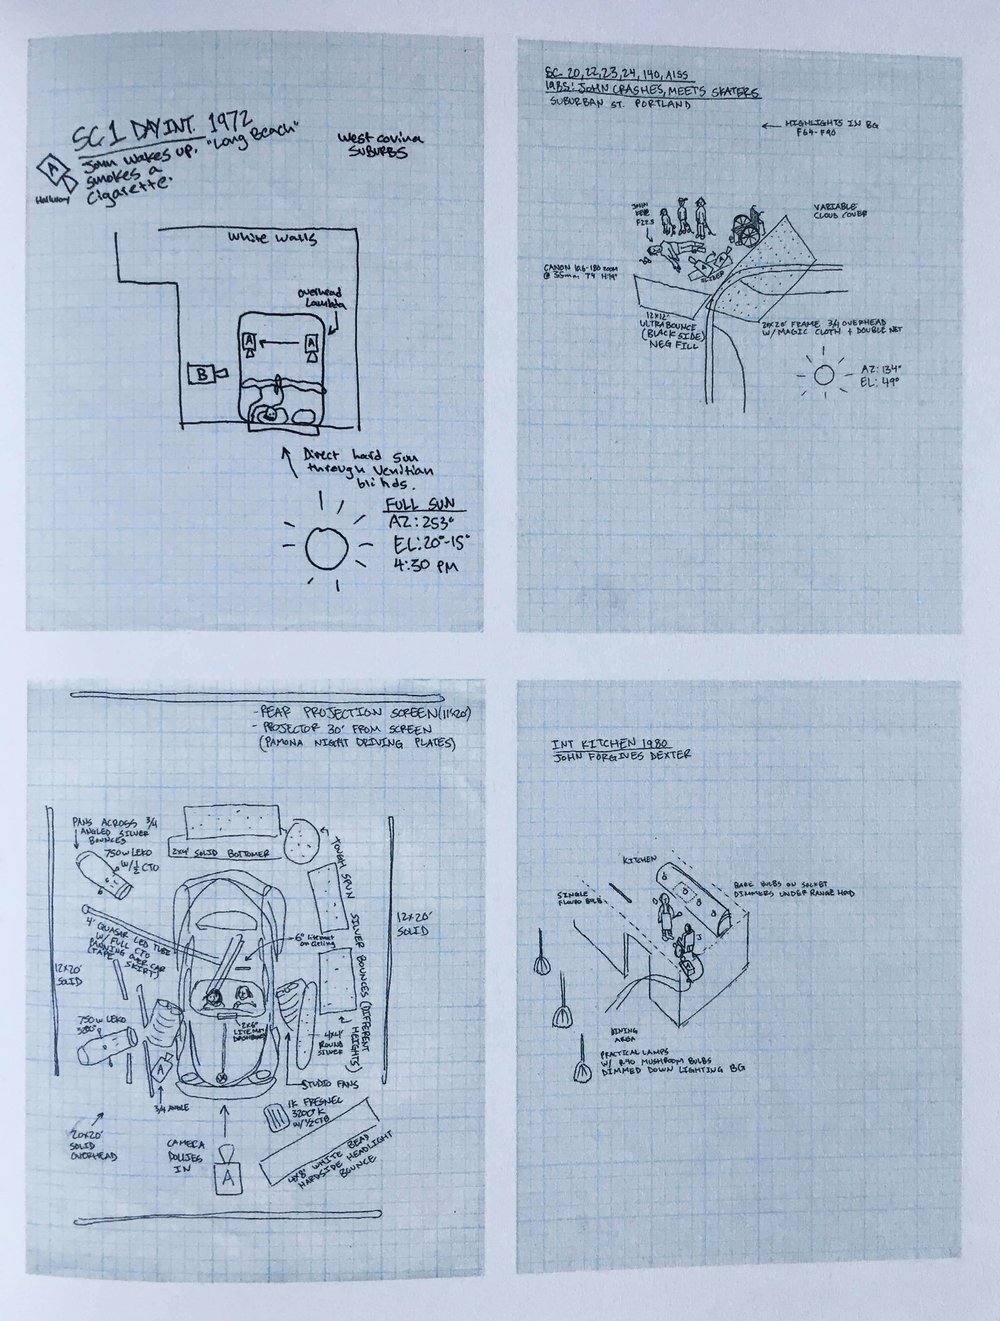 Storyboards of Gus Van Sant's Don't Worry, He Won't get Far On Foot (Copy)